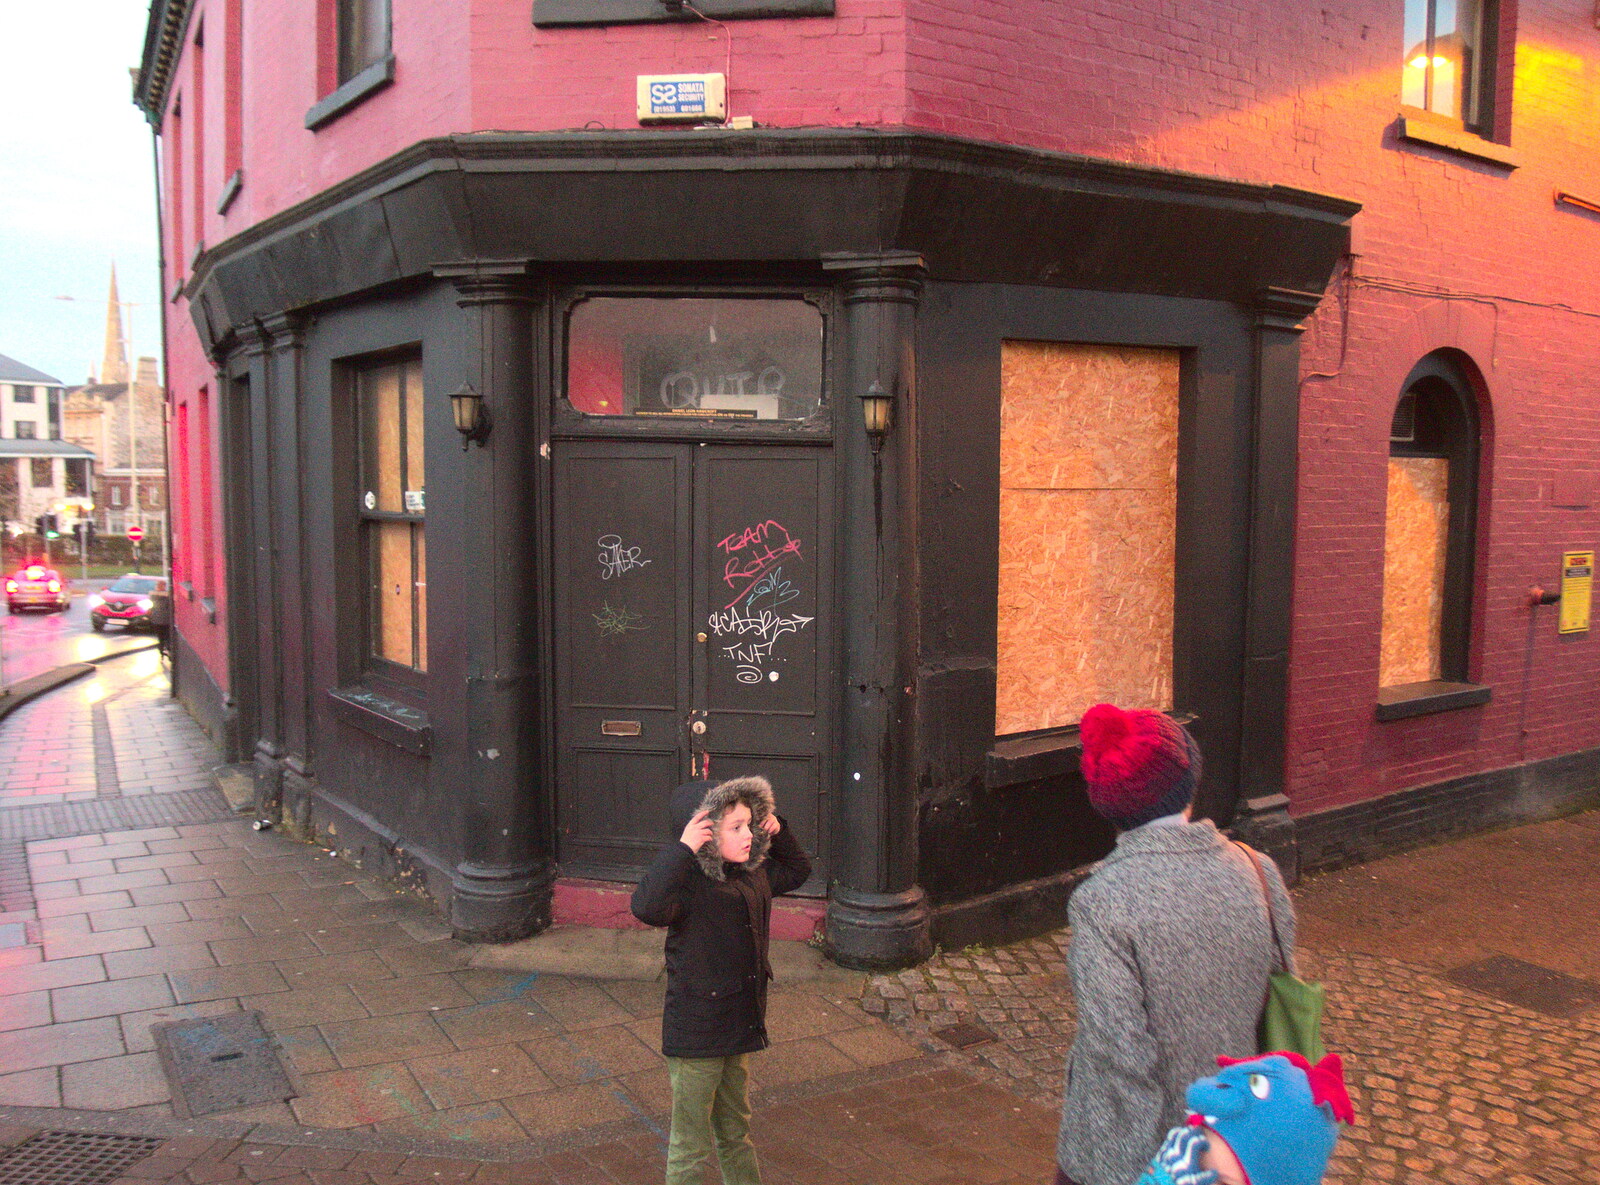 Fred outside a derelict pub on Cattle Market Street from A Trip to the Cinema, Norwich, Norfolk - 3rd December 2017